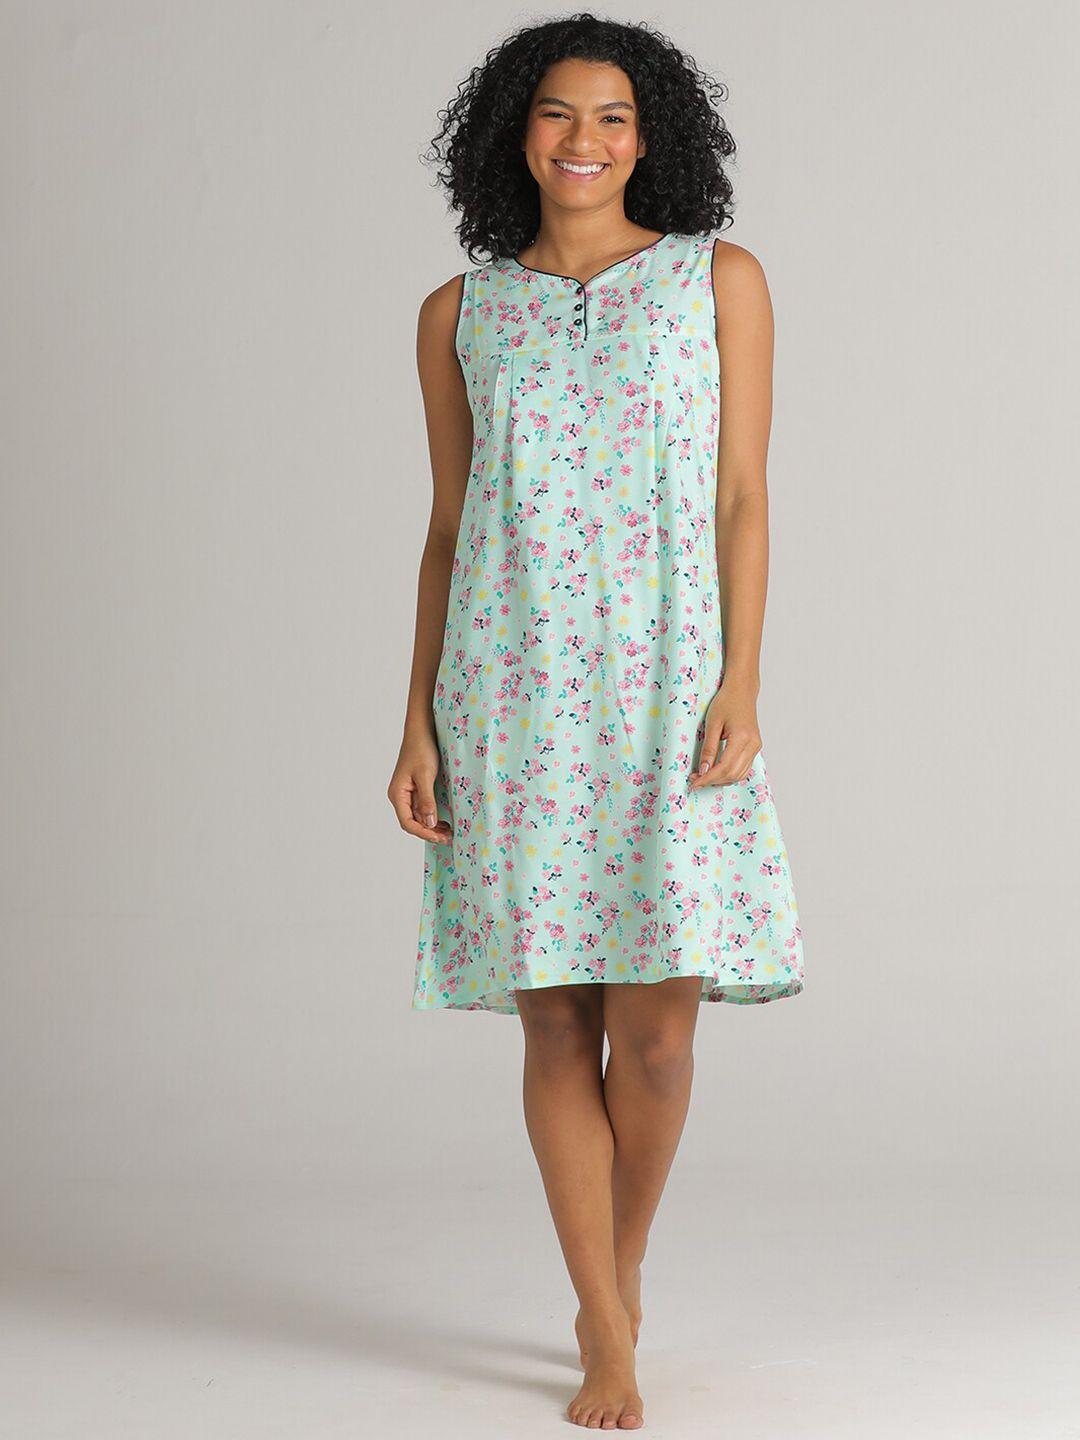 evolove-sea-green-&-pink-floral-printed-nightdress